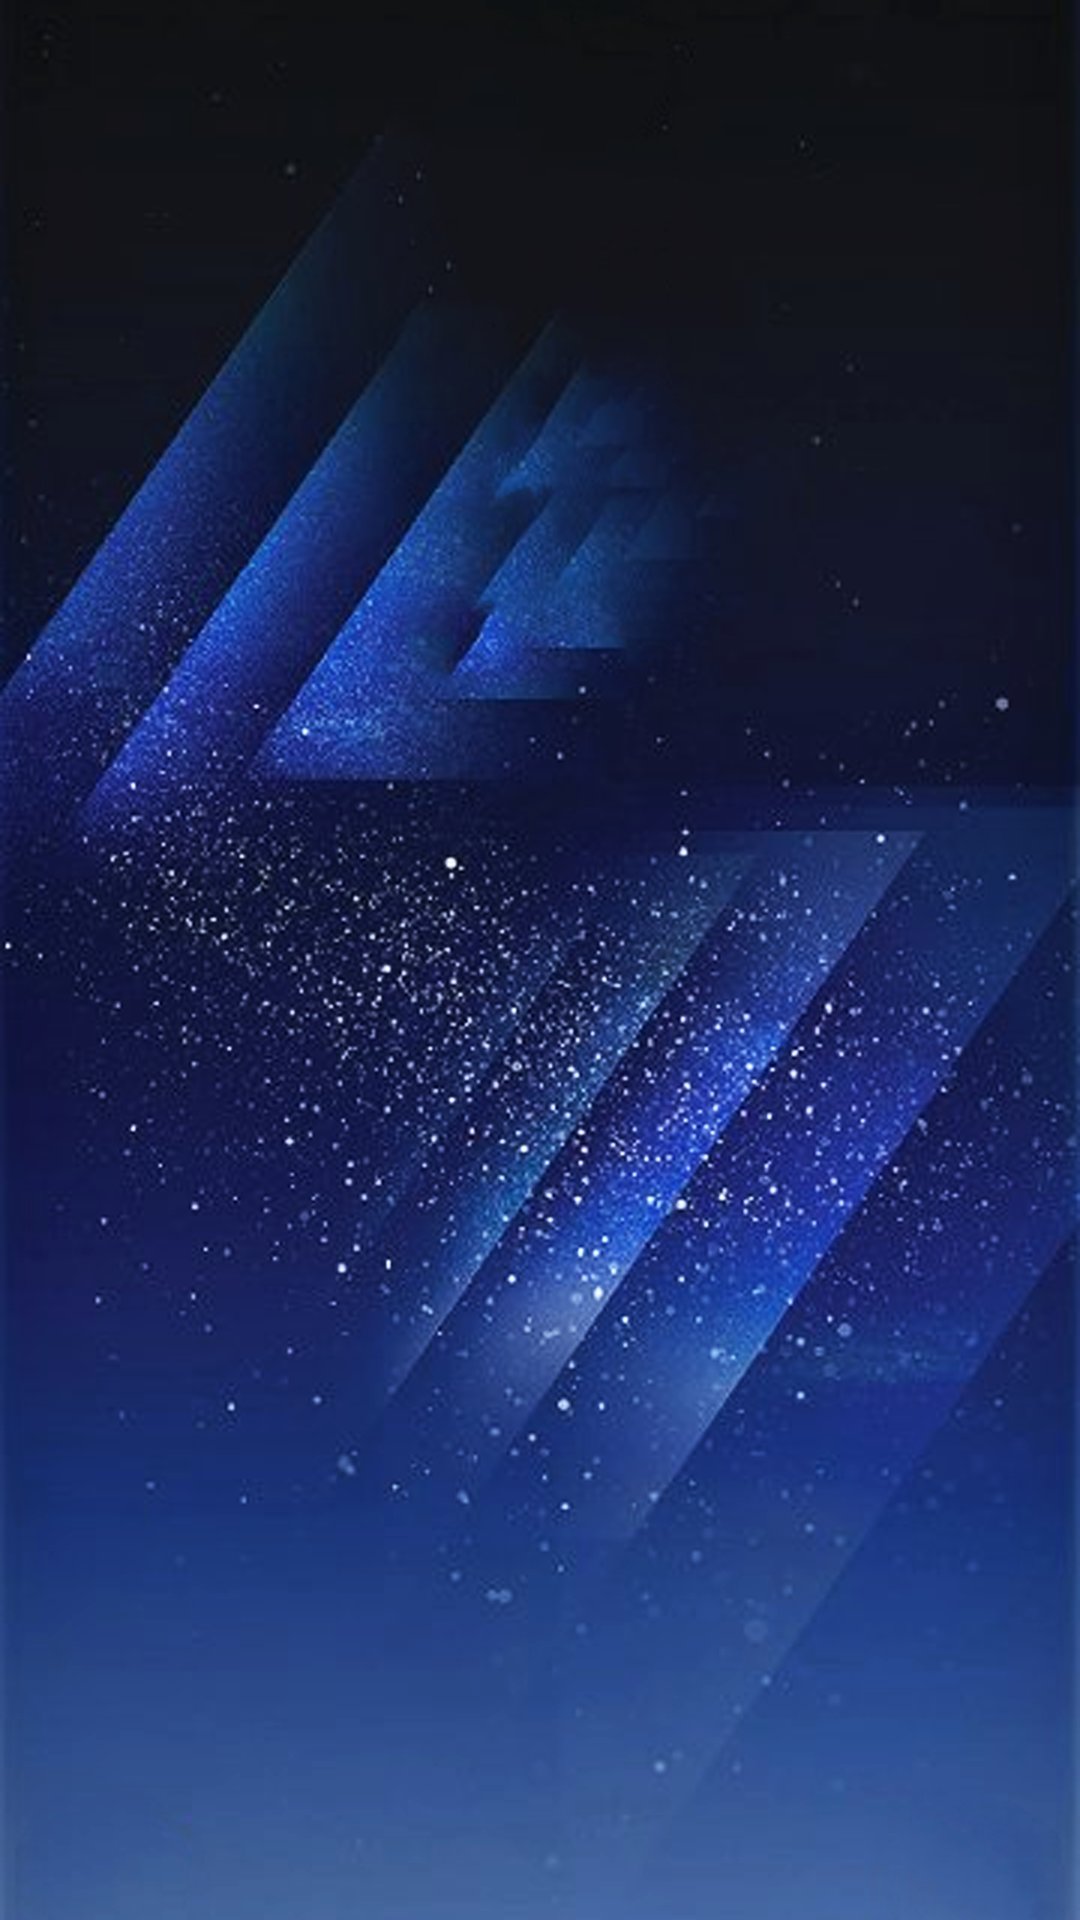 Samsung Galaxy S8 Stock Wallpaper Leaked